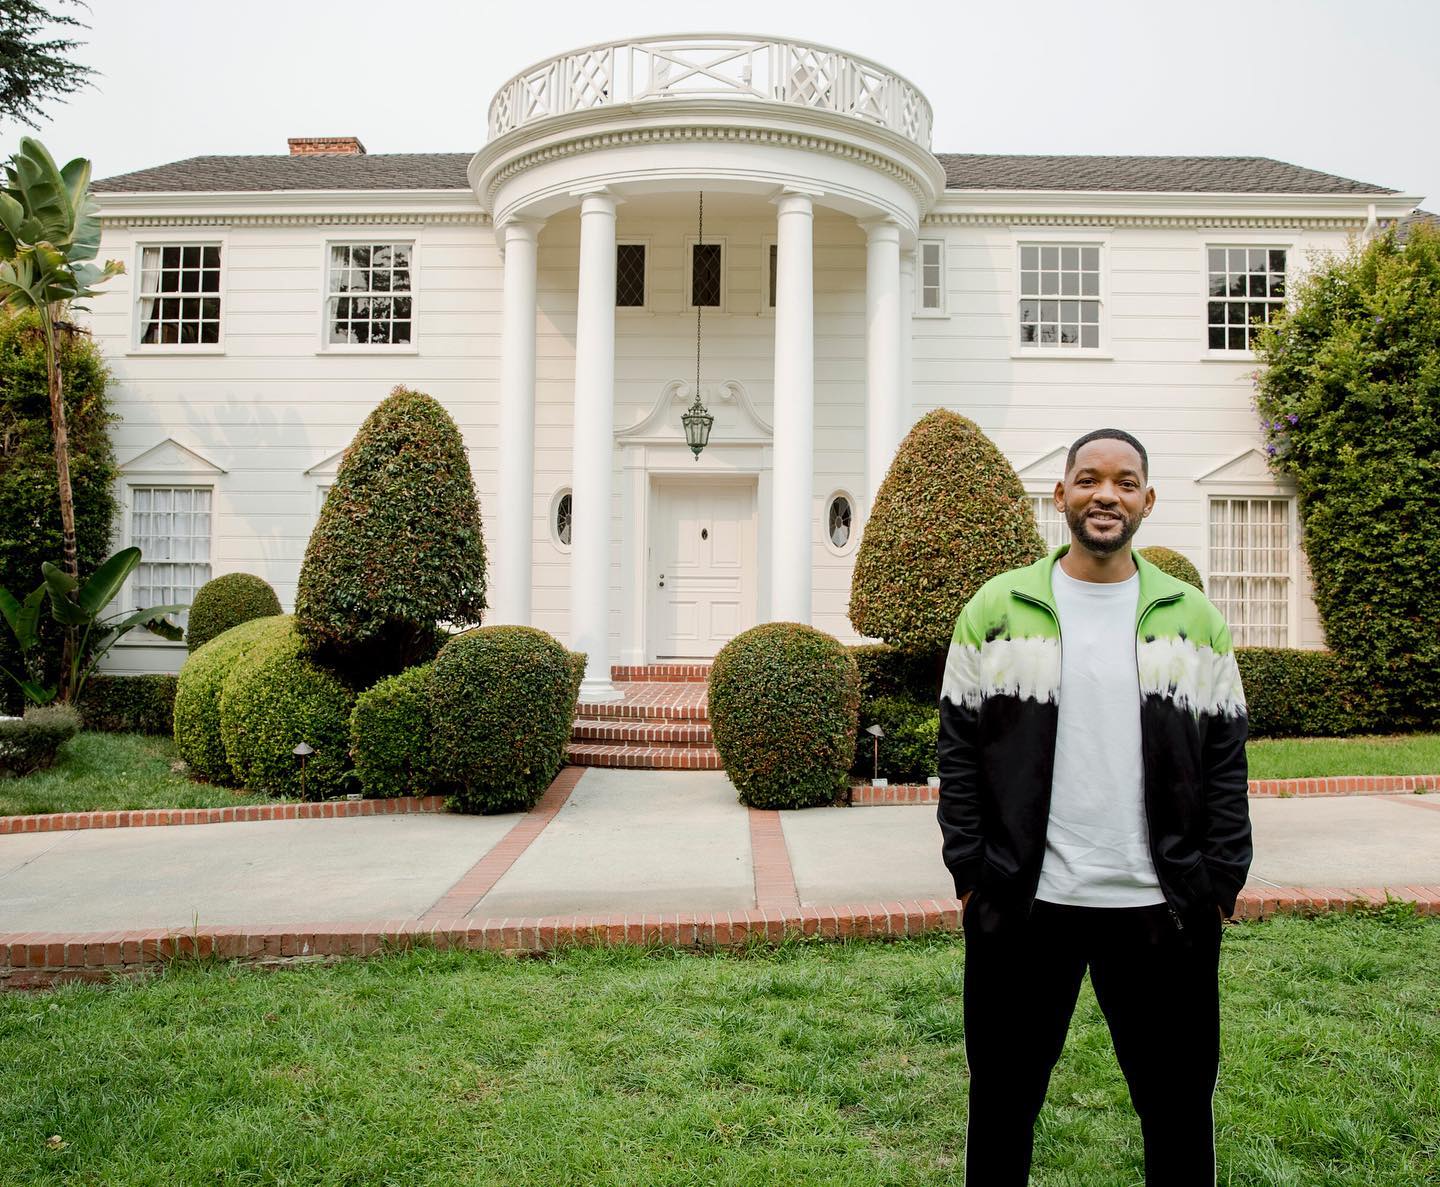 Photo by Will Smith in Bel Air with @freshprince. May be an image of 1 person